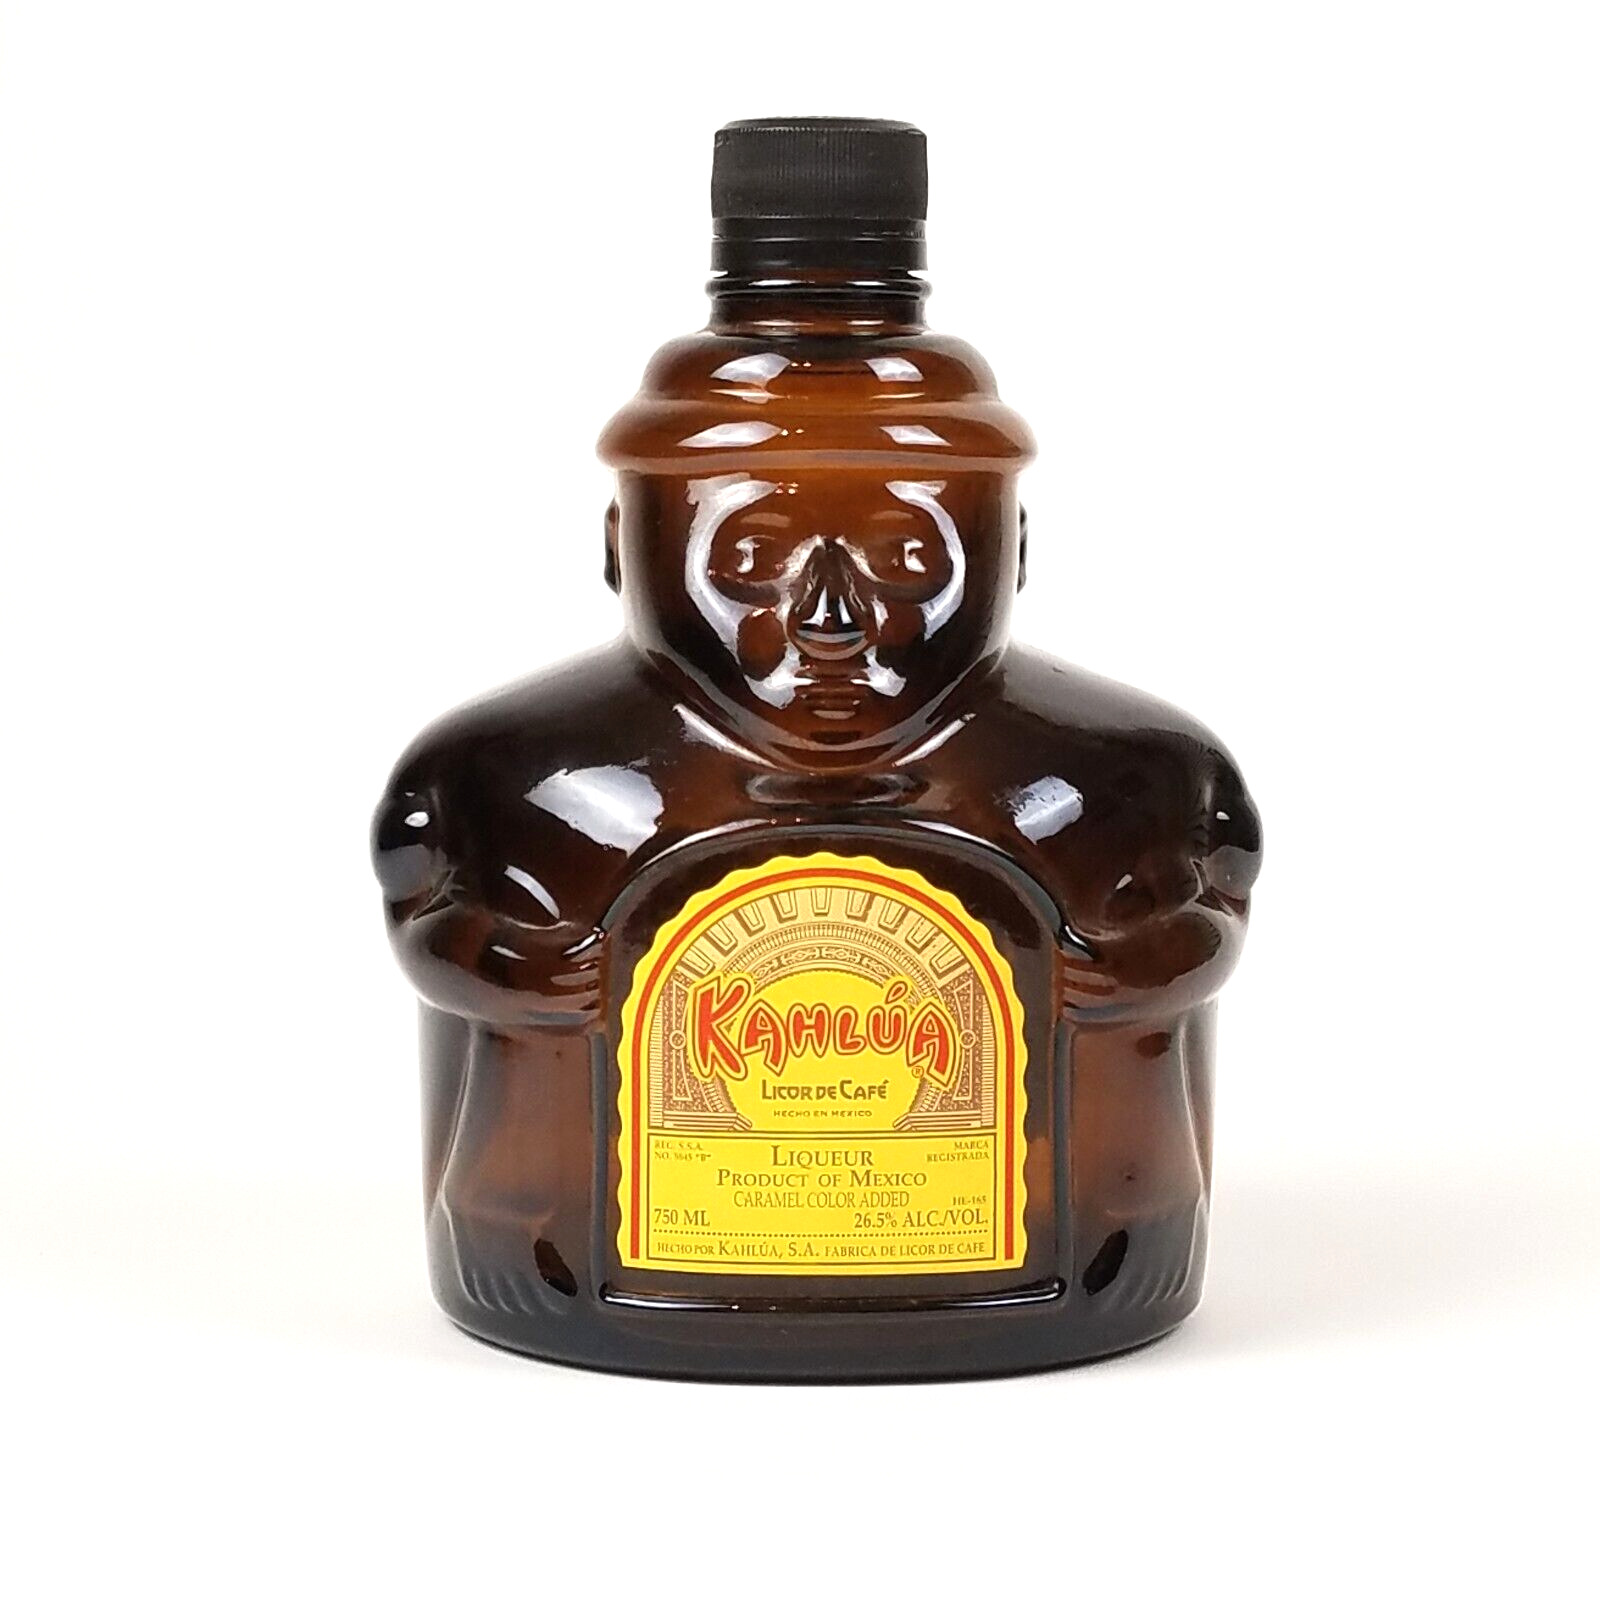 VTG Kahlua Bottle Heritage Edition II Ethnic Pride Mexican Collection 750ML